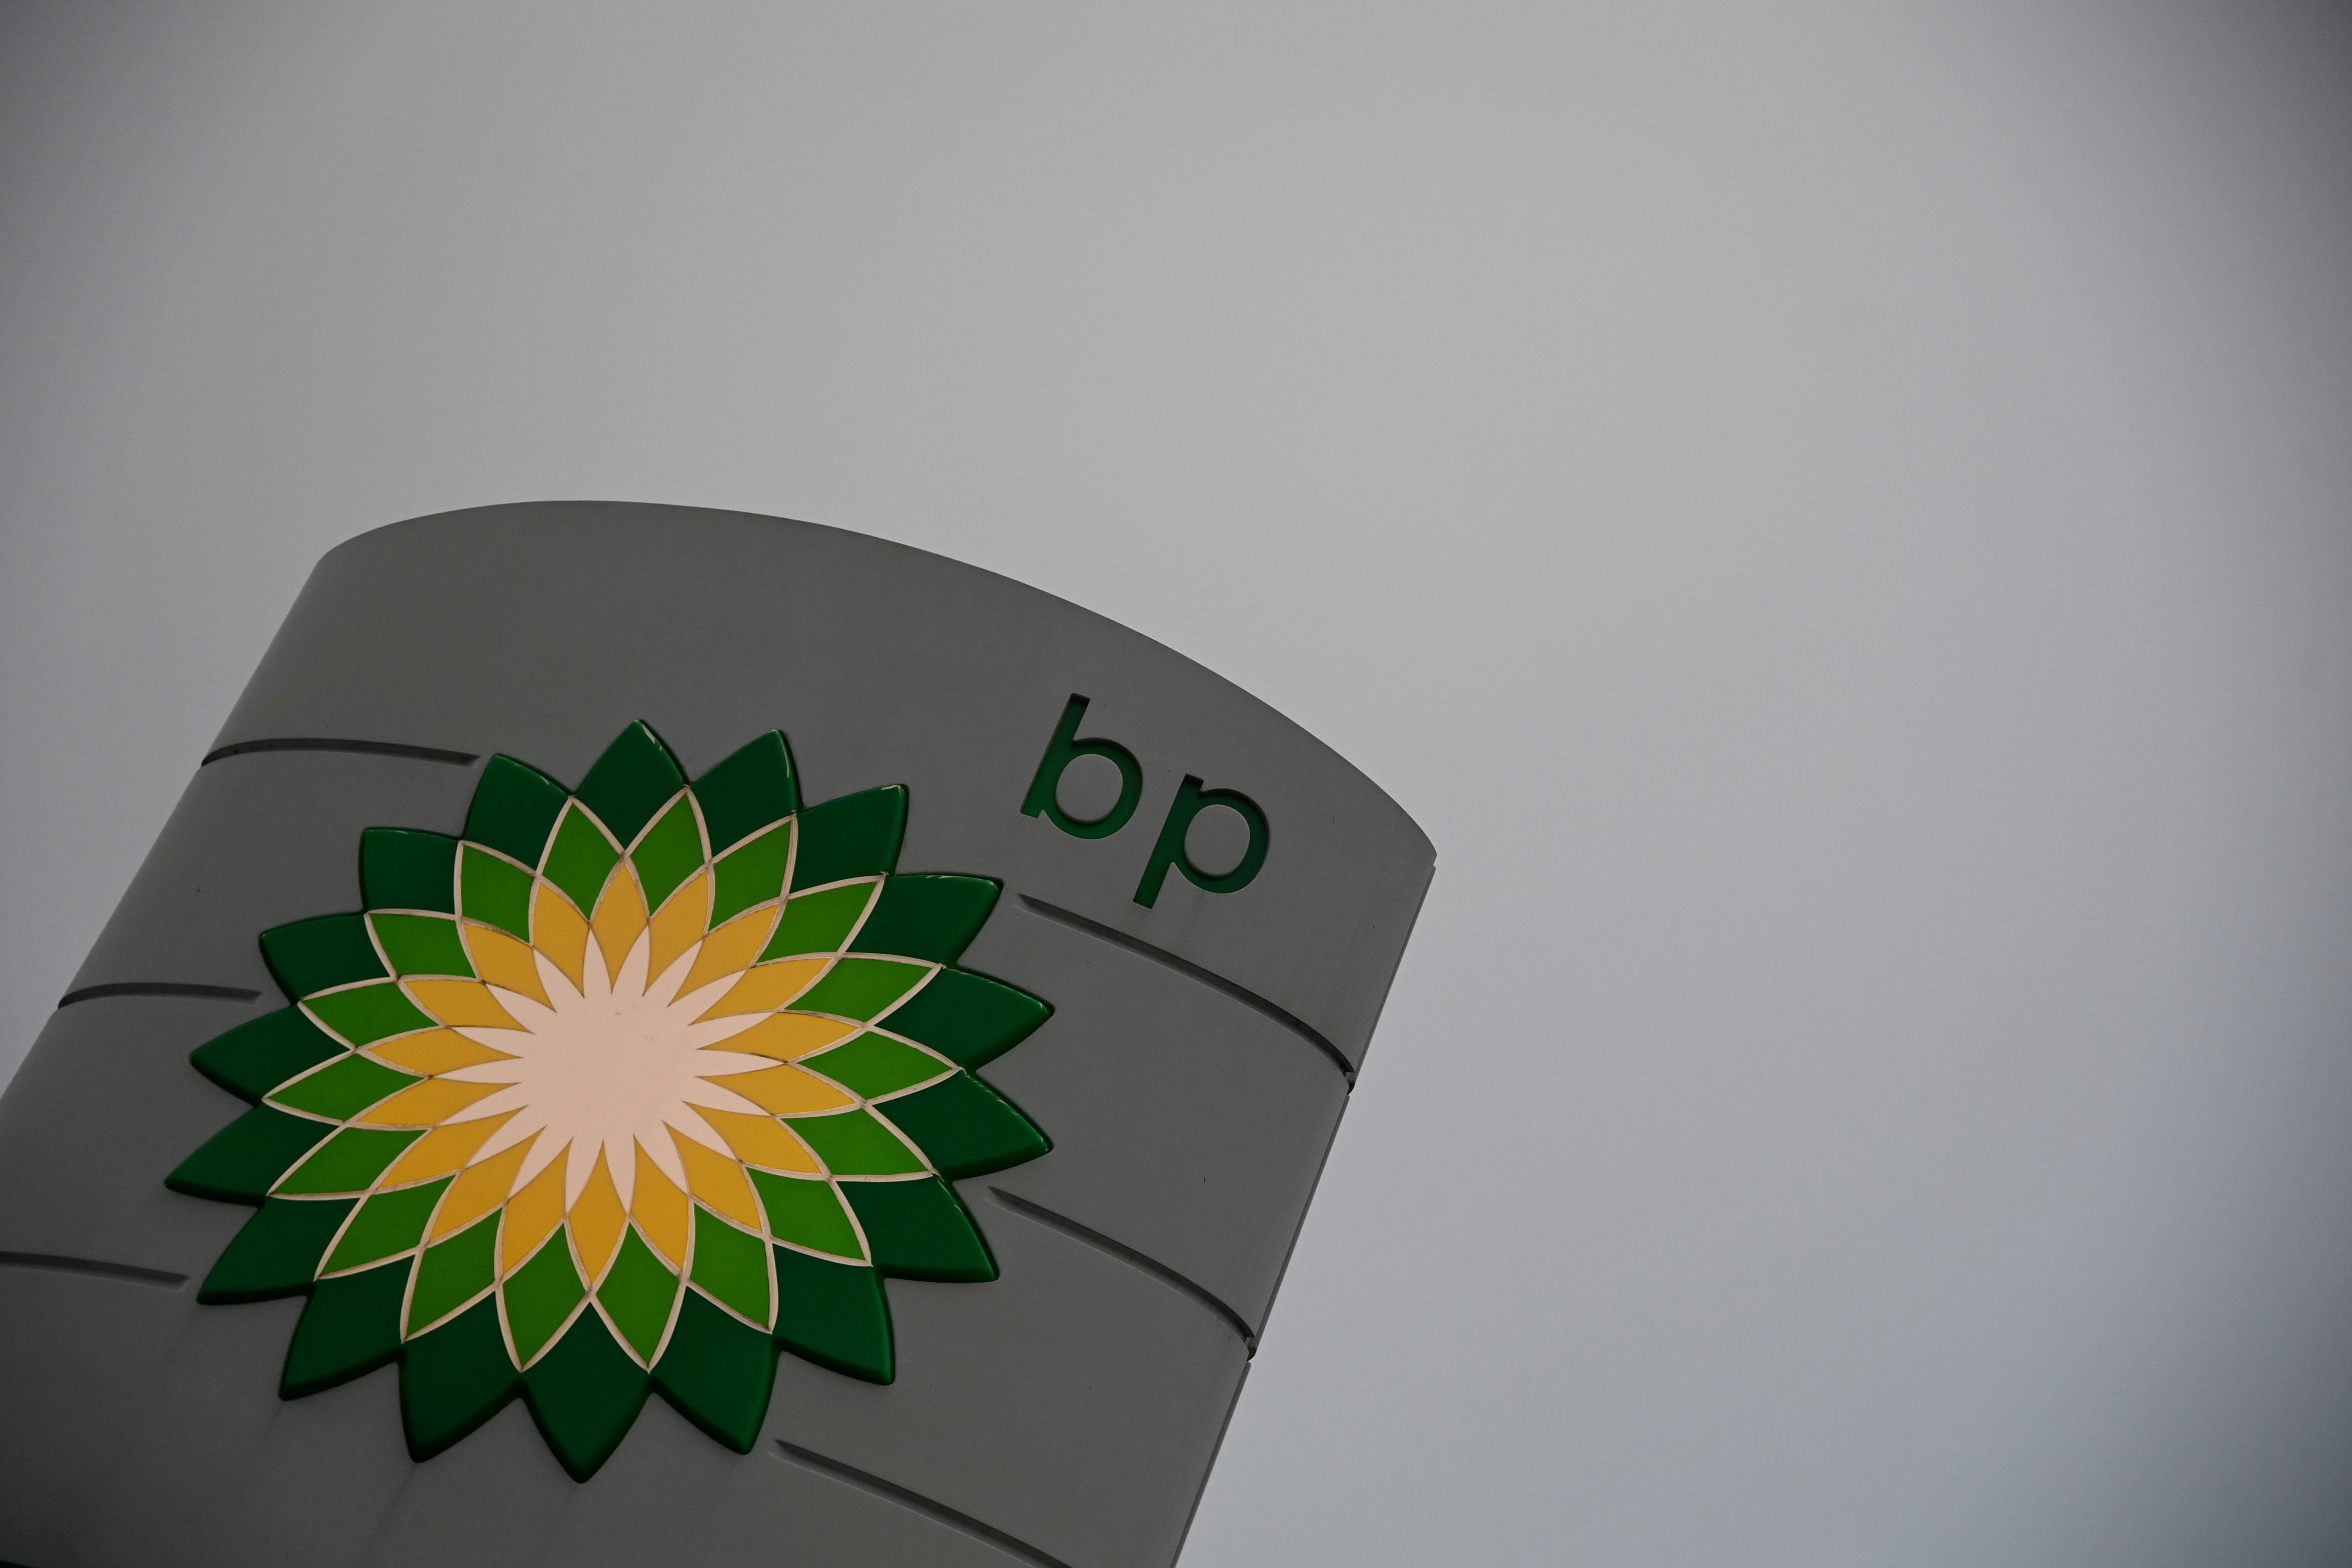 The logo for a BP petrol station is seen in London, Britain, September 24, 2021. REUTERS/Toby Melville